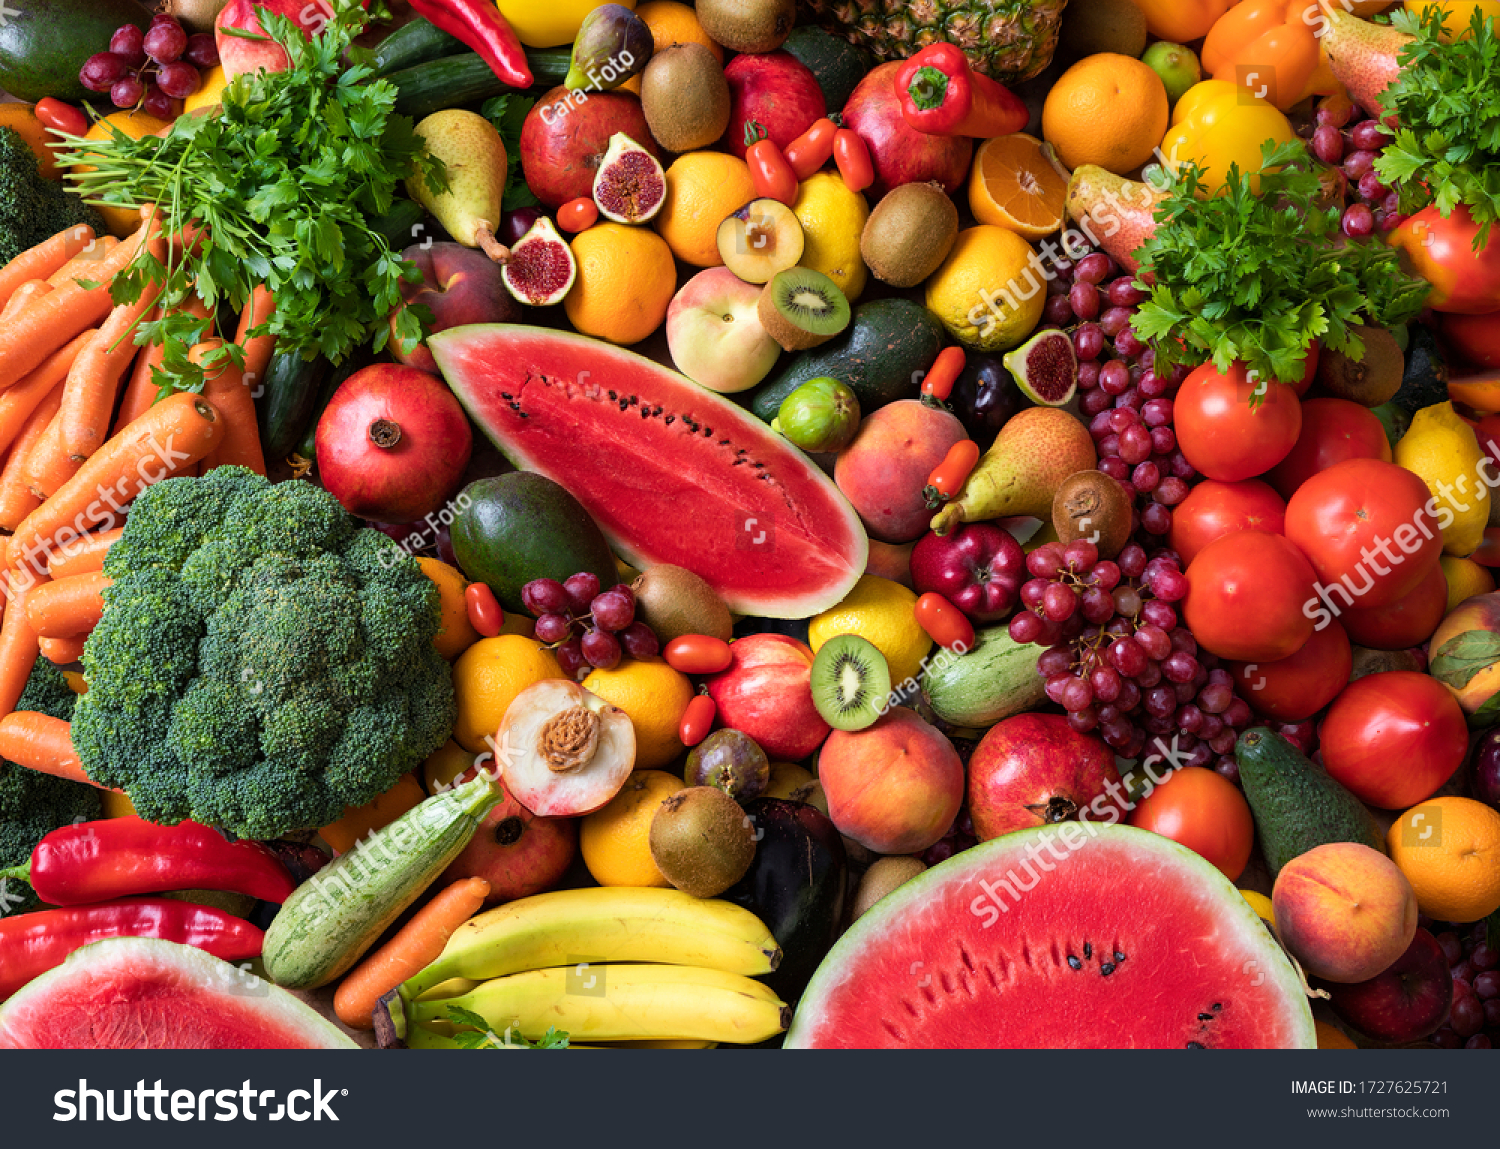 Variety of fruits and vegetables #1727625721